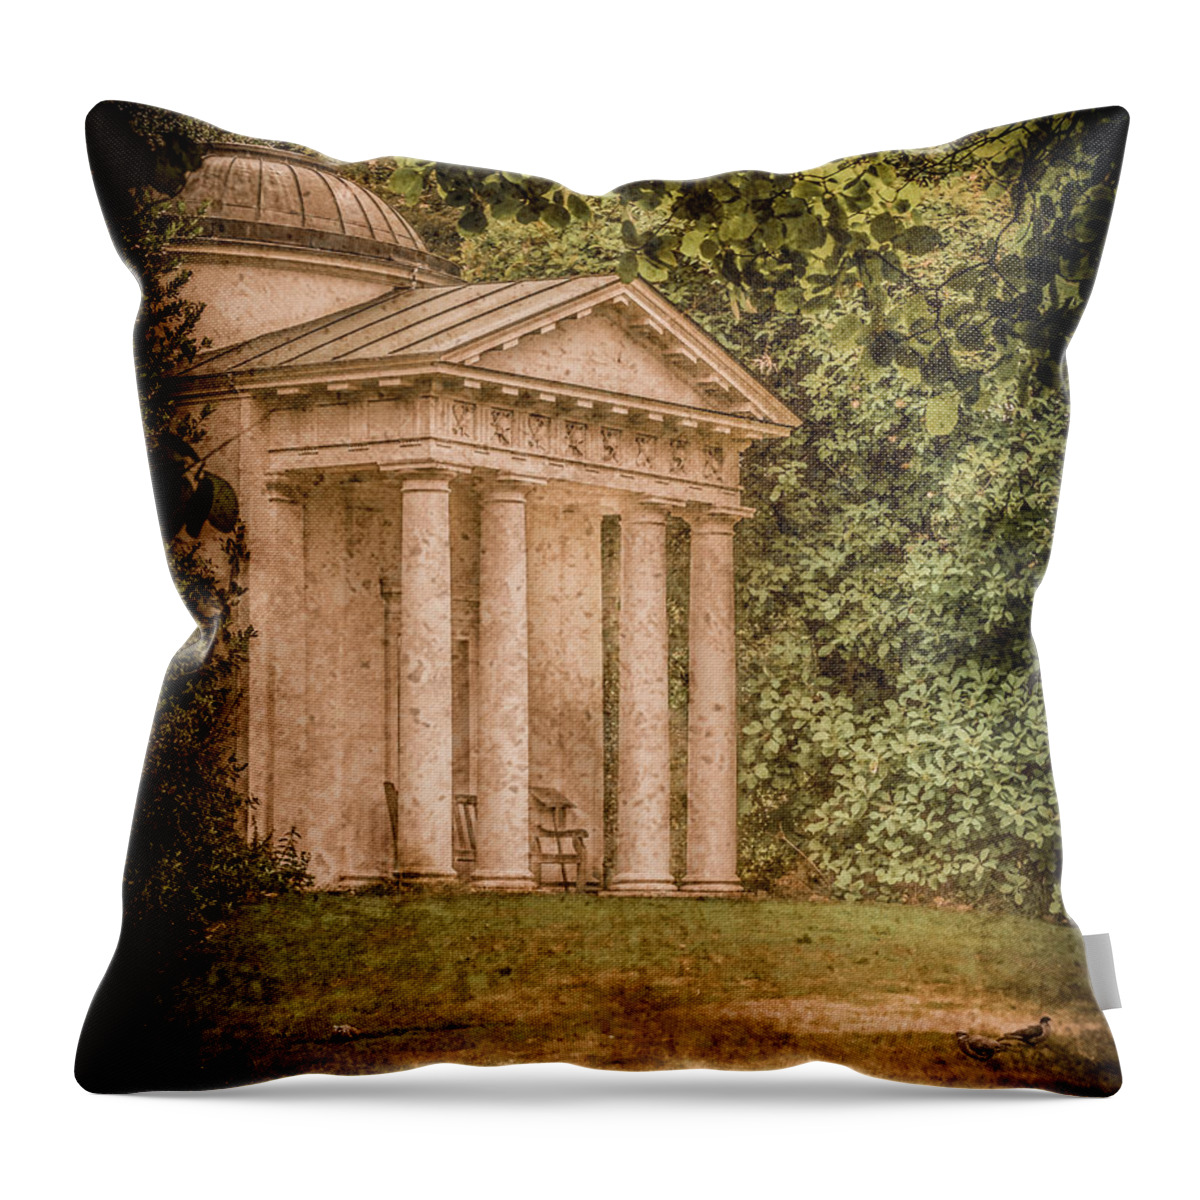 England Throw Pillow featuring the photograph Kew Gardens, England - Temple of Bellona by Mark Forte